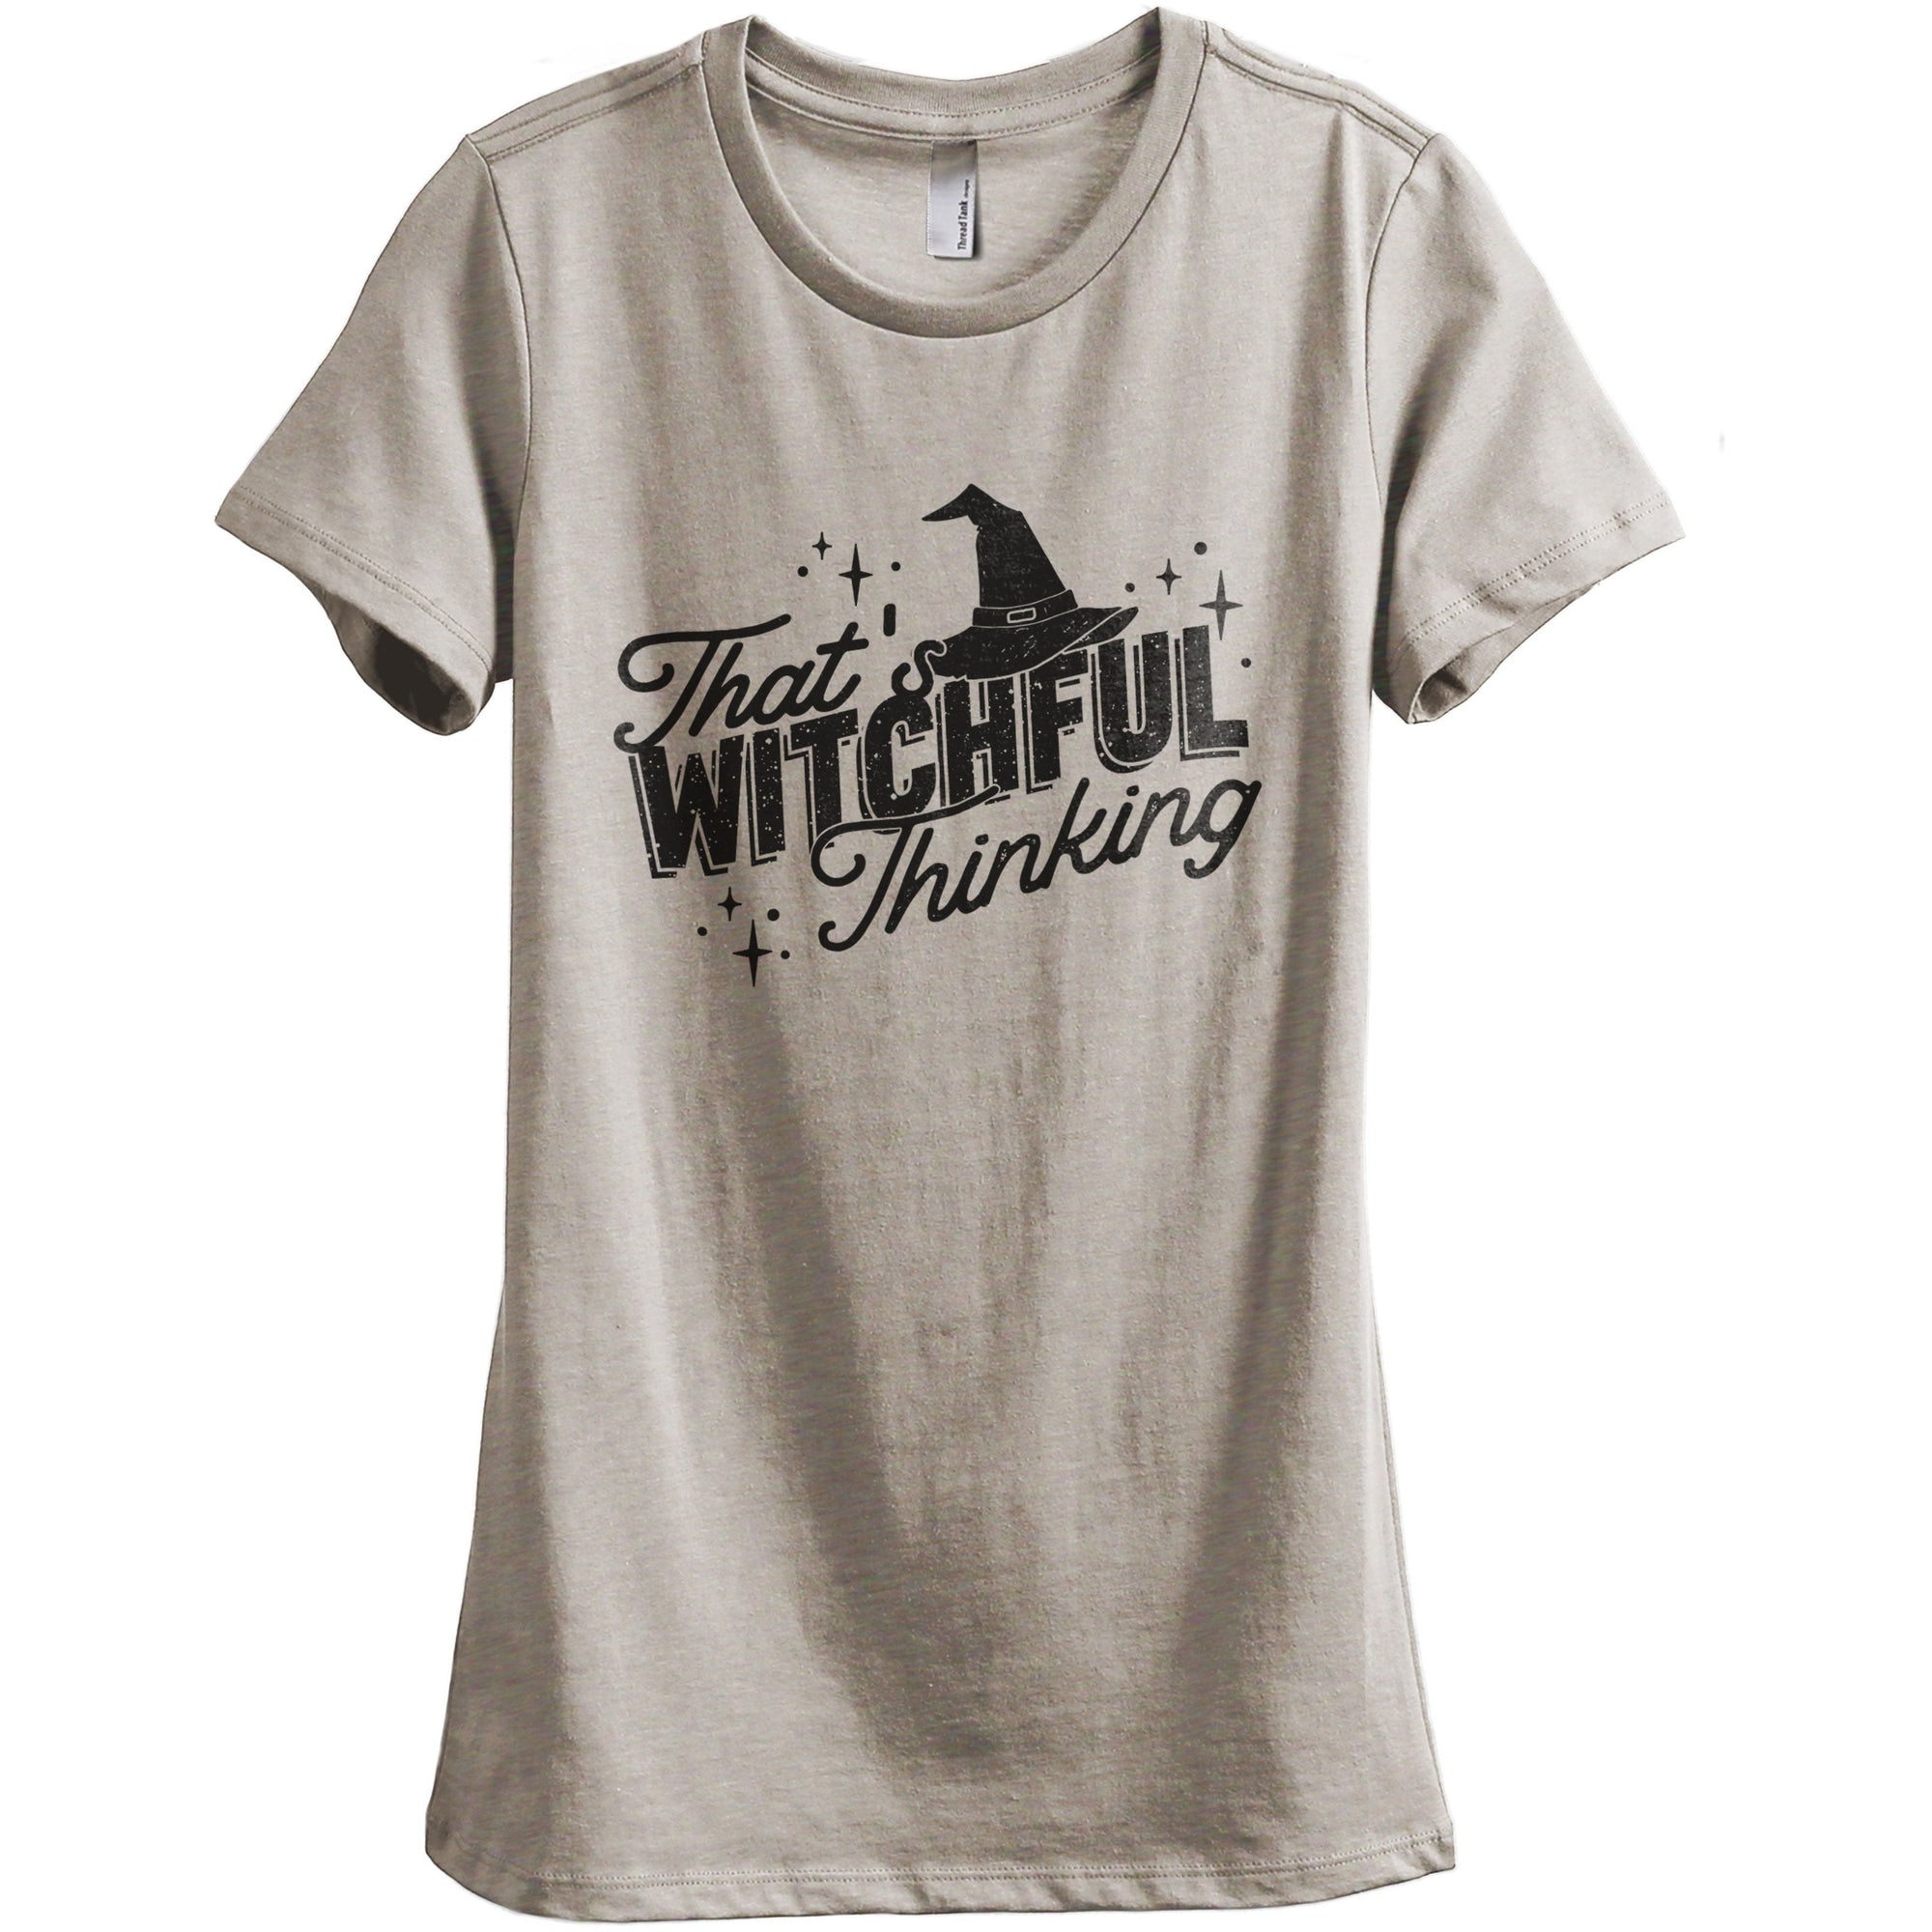 That's Witchful Thinking - thread tank | Stories you can wear.